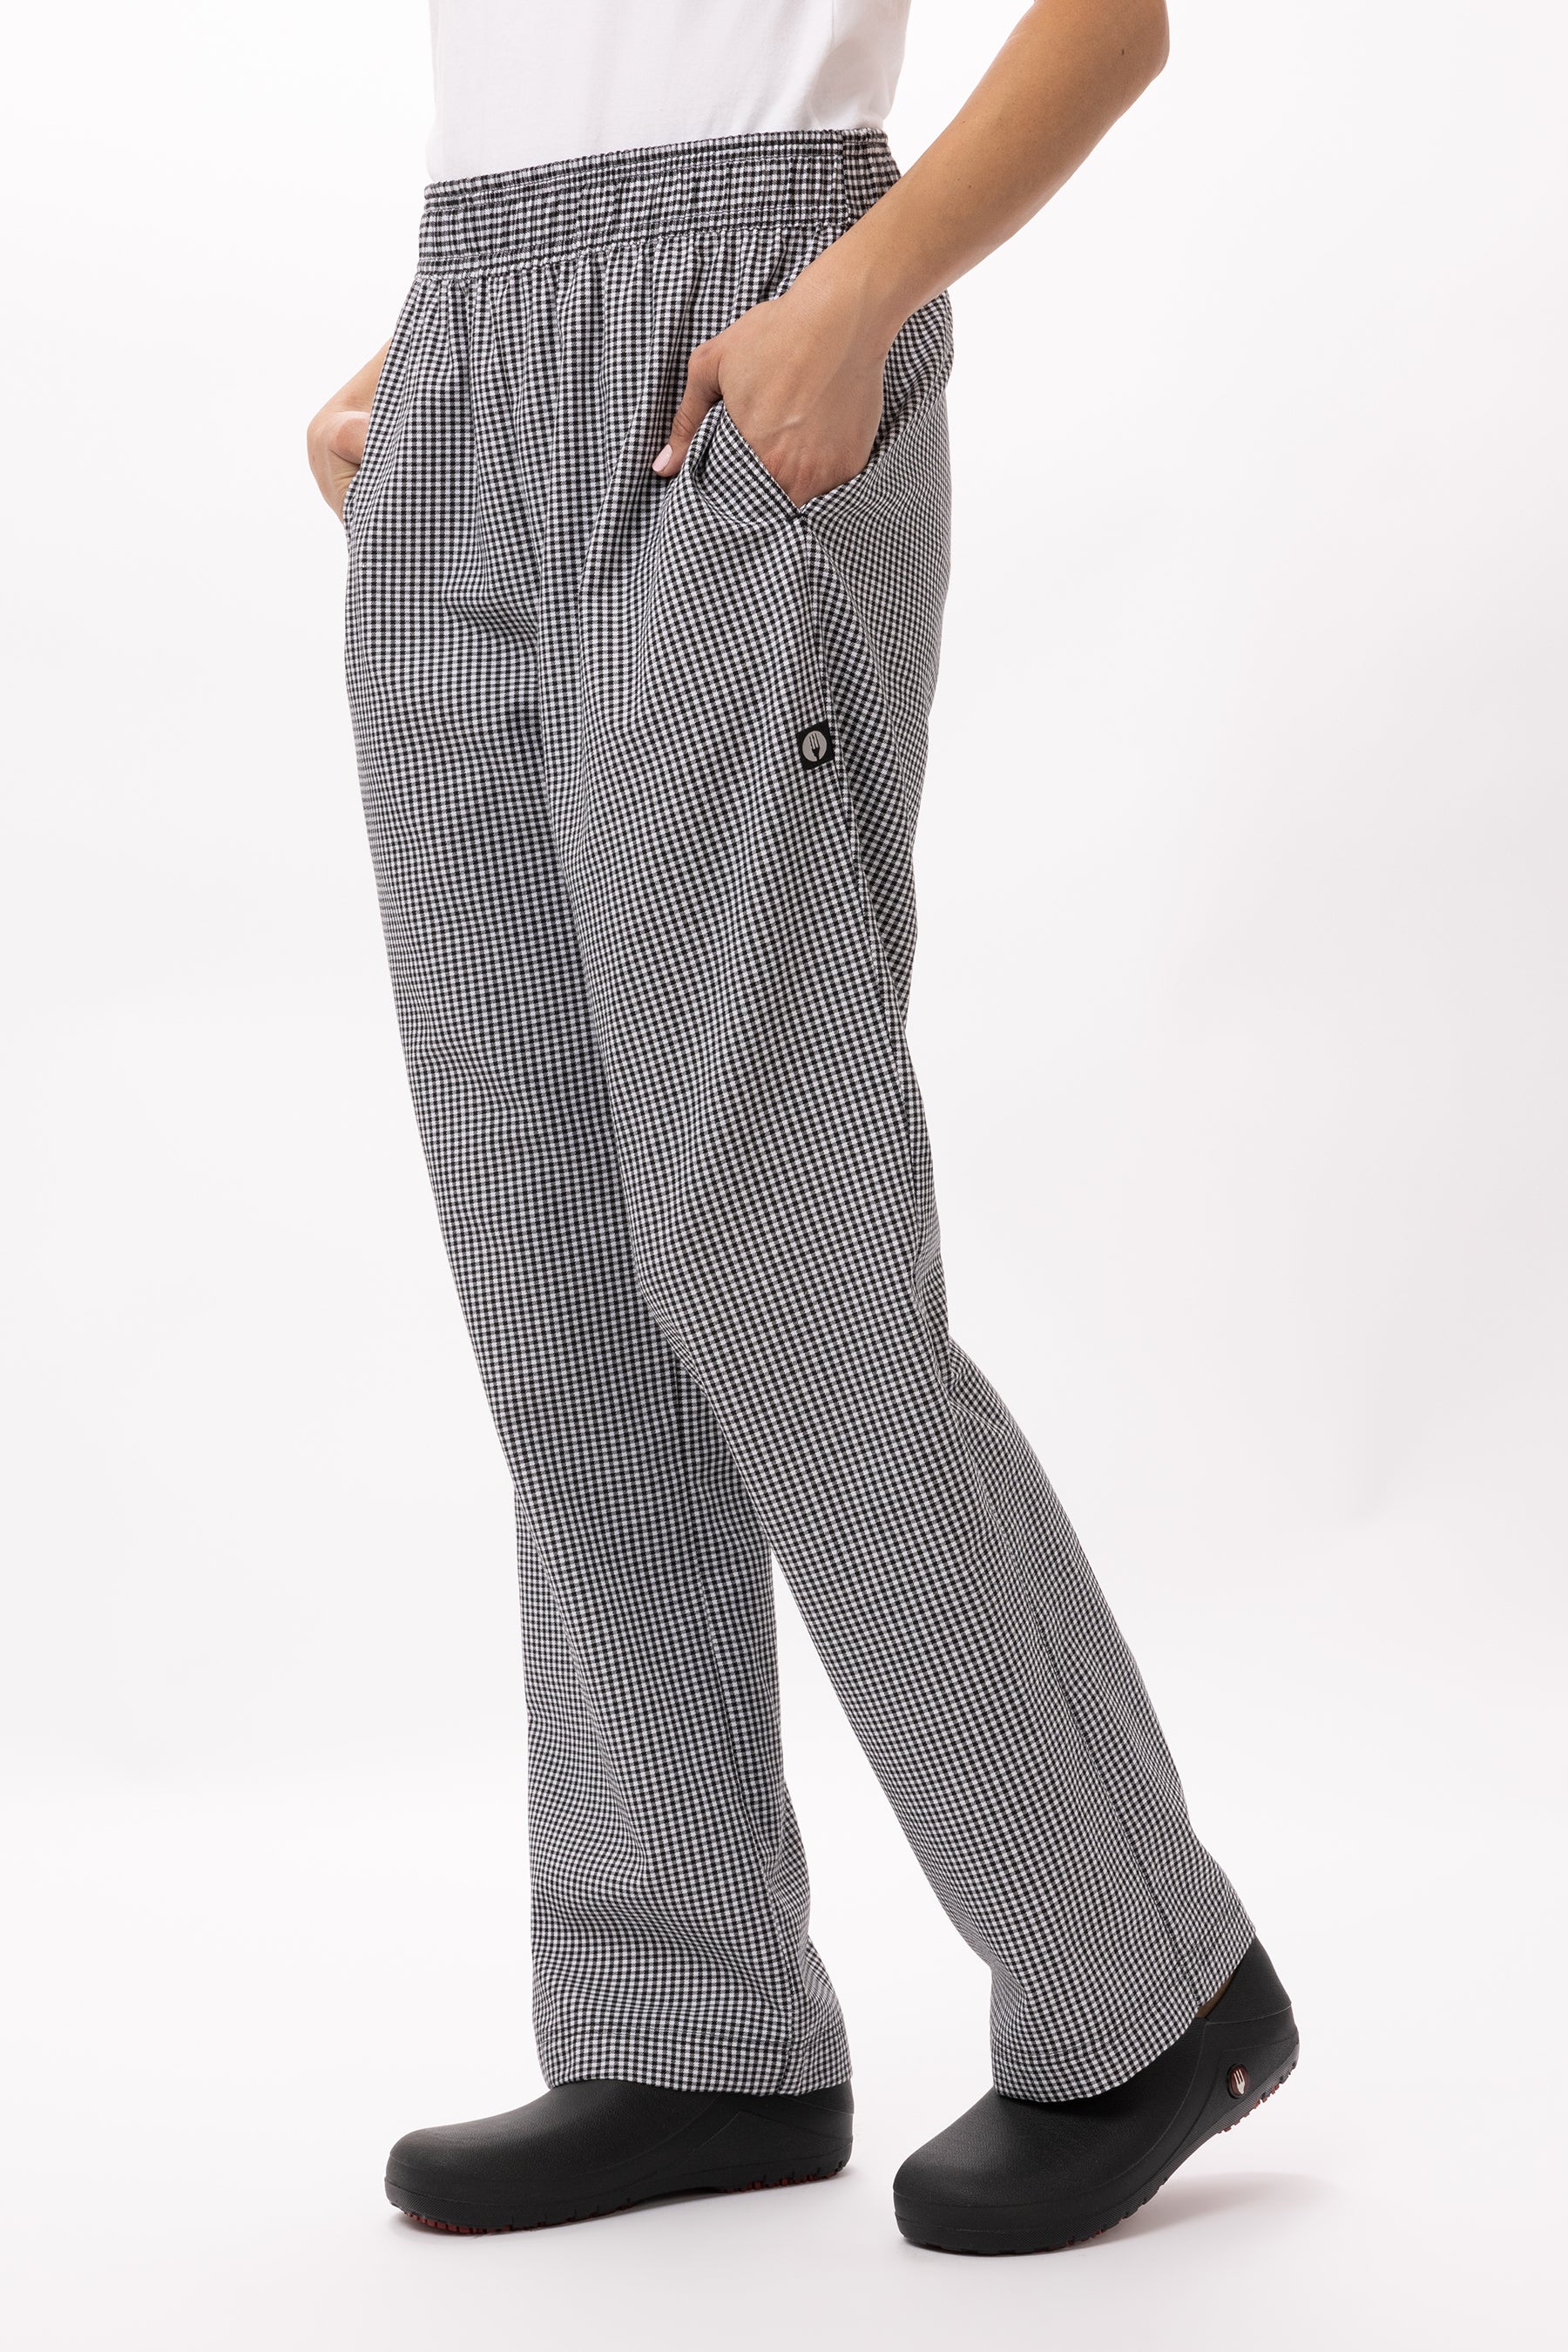 Buy black-check ESSENTIAL BAGGY CHEF PANTS WOMENS